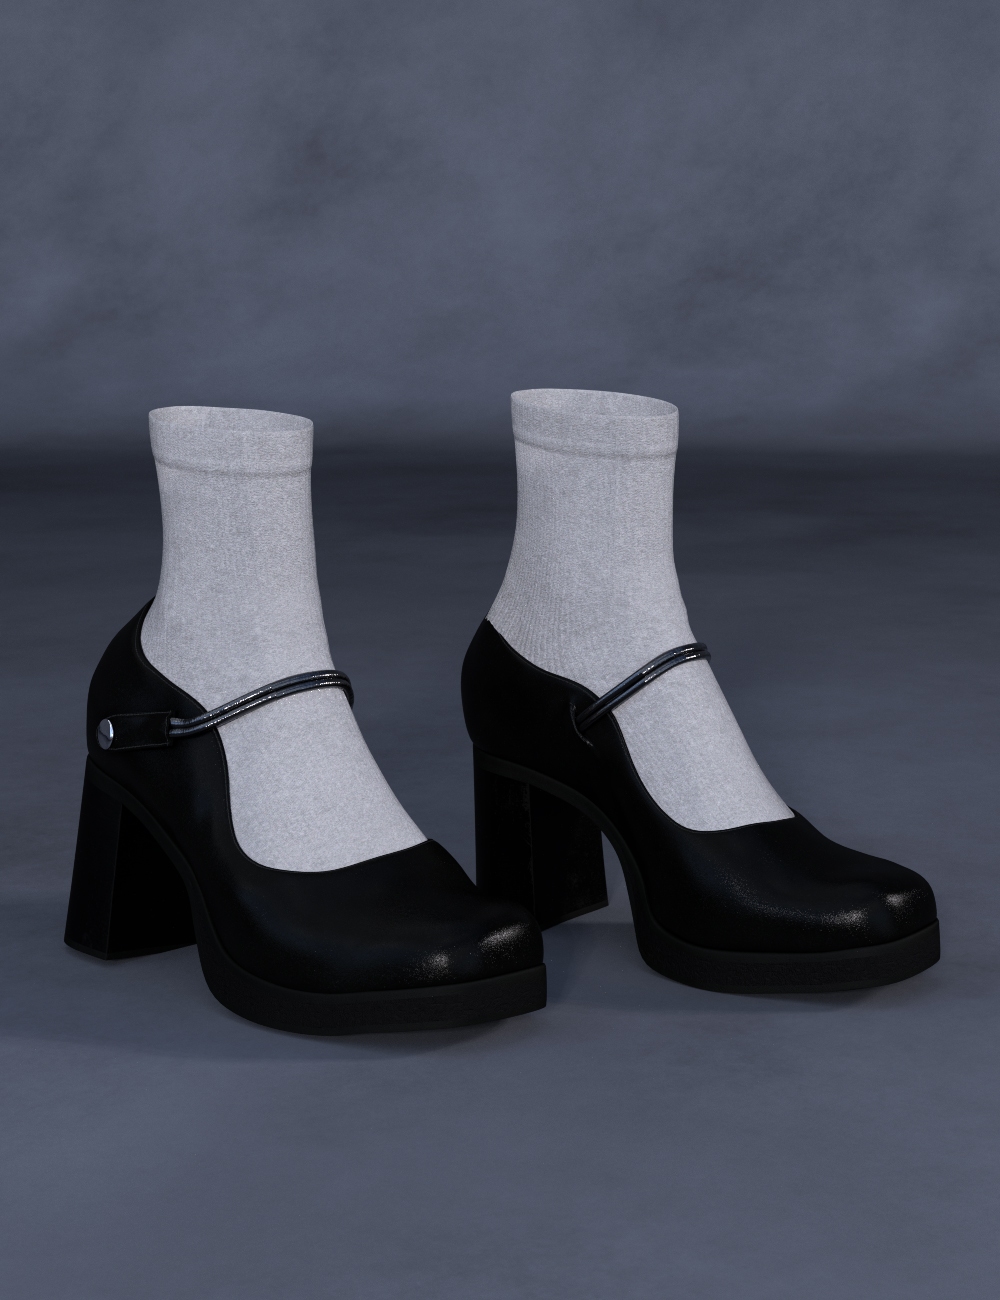 Hepburn Style Socks and Shoes for Genesis 8 and 8.1 Females by: Green Finger, 3D Models by Daz 3D